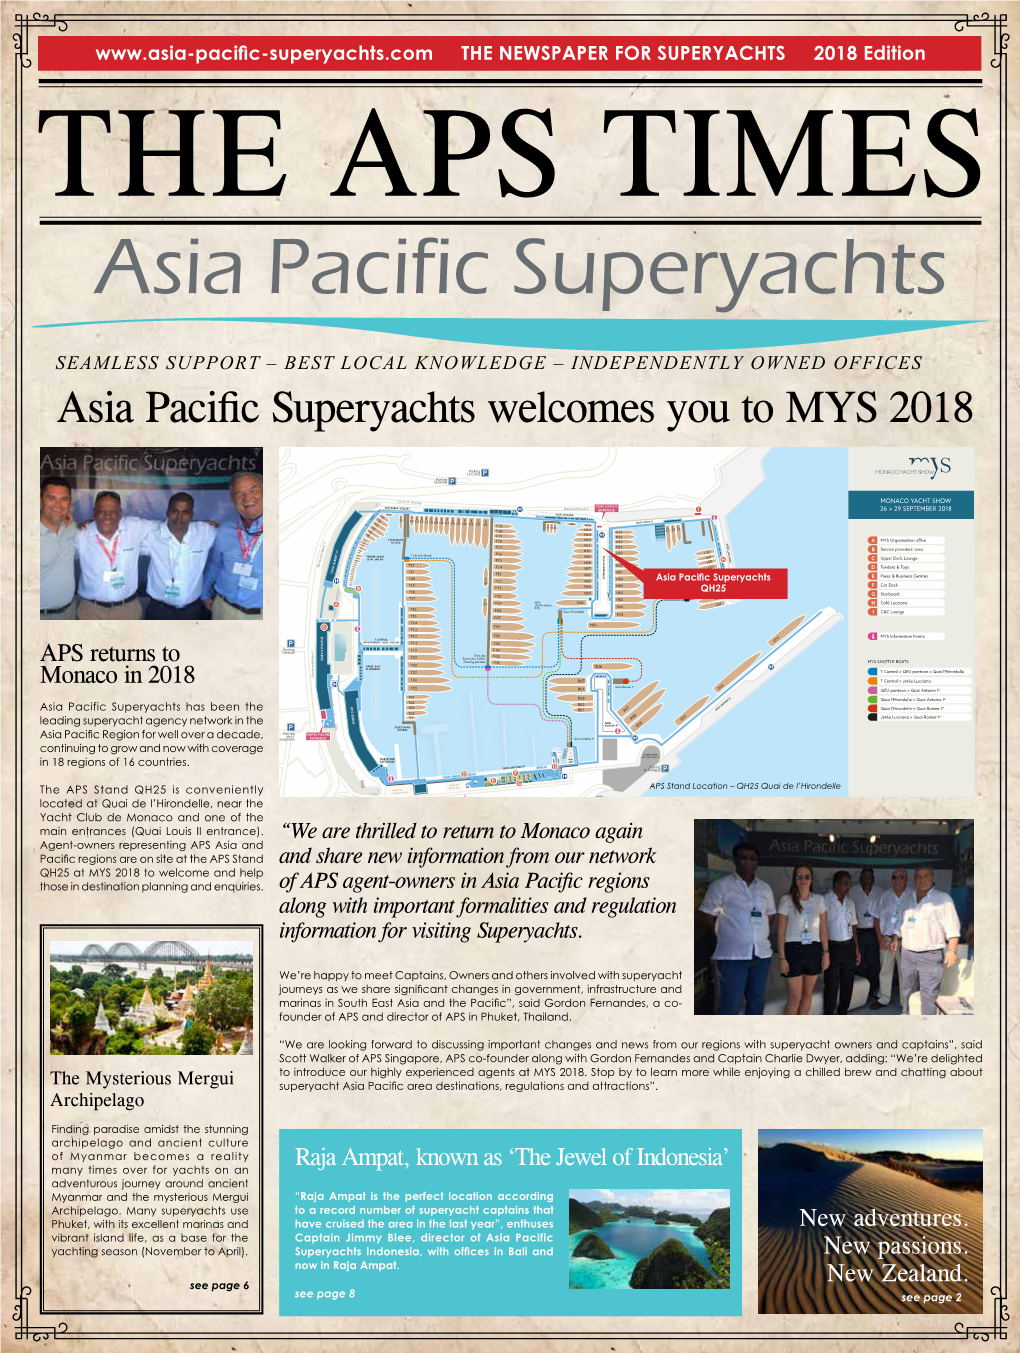 Asia Pacific Superyachts Welcomes You to MYS 2018